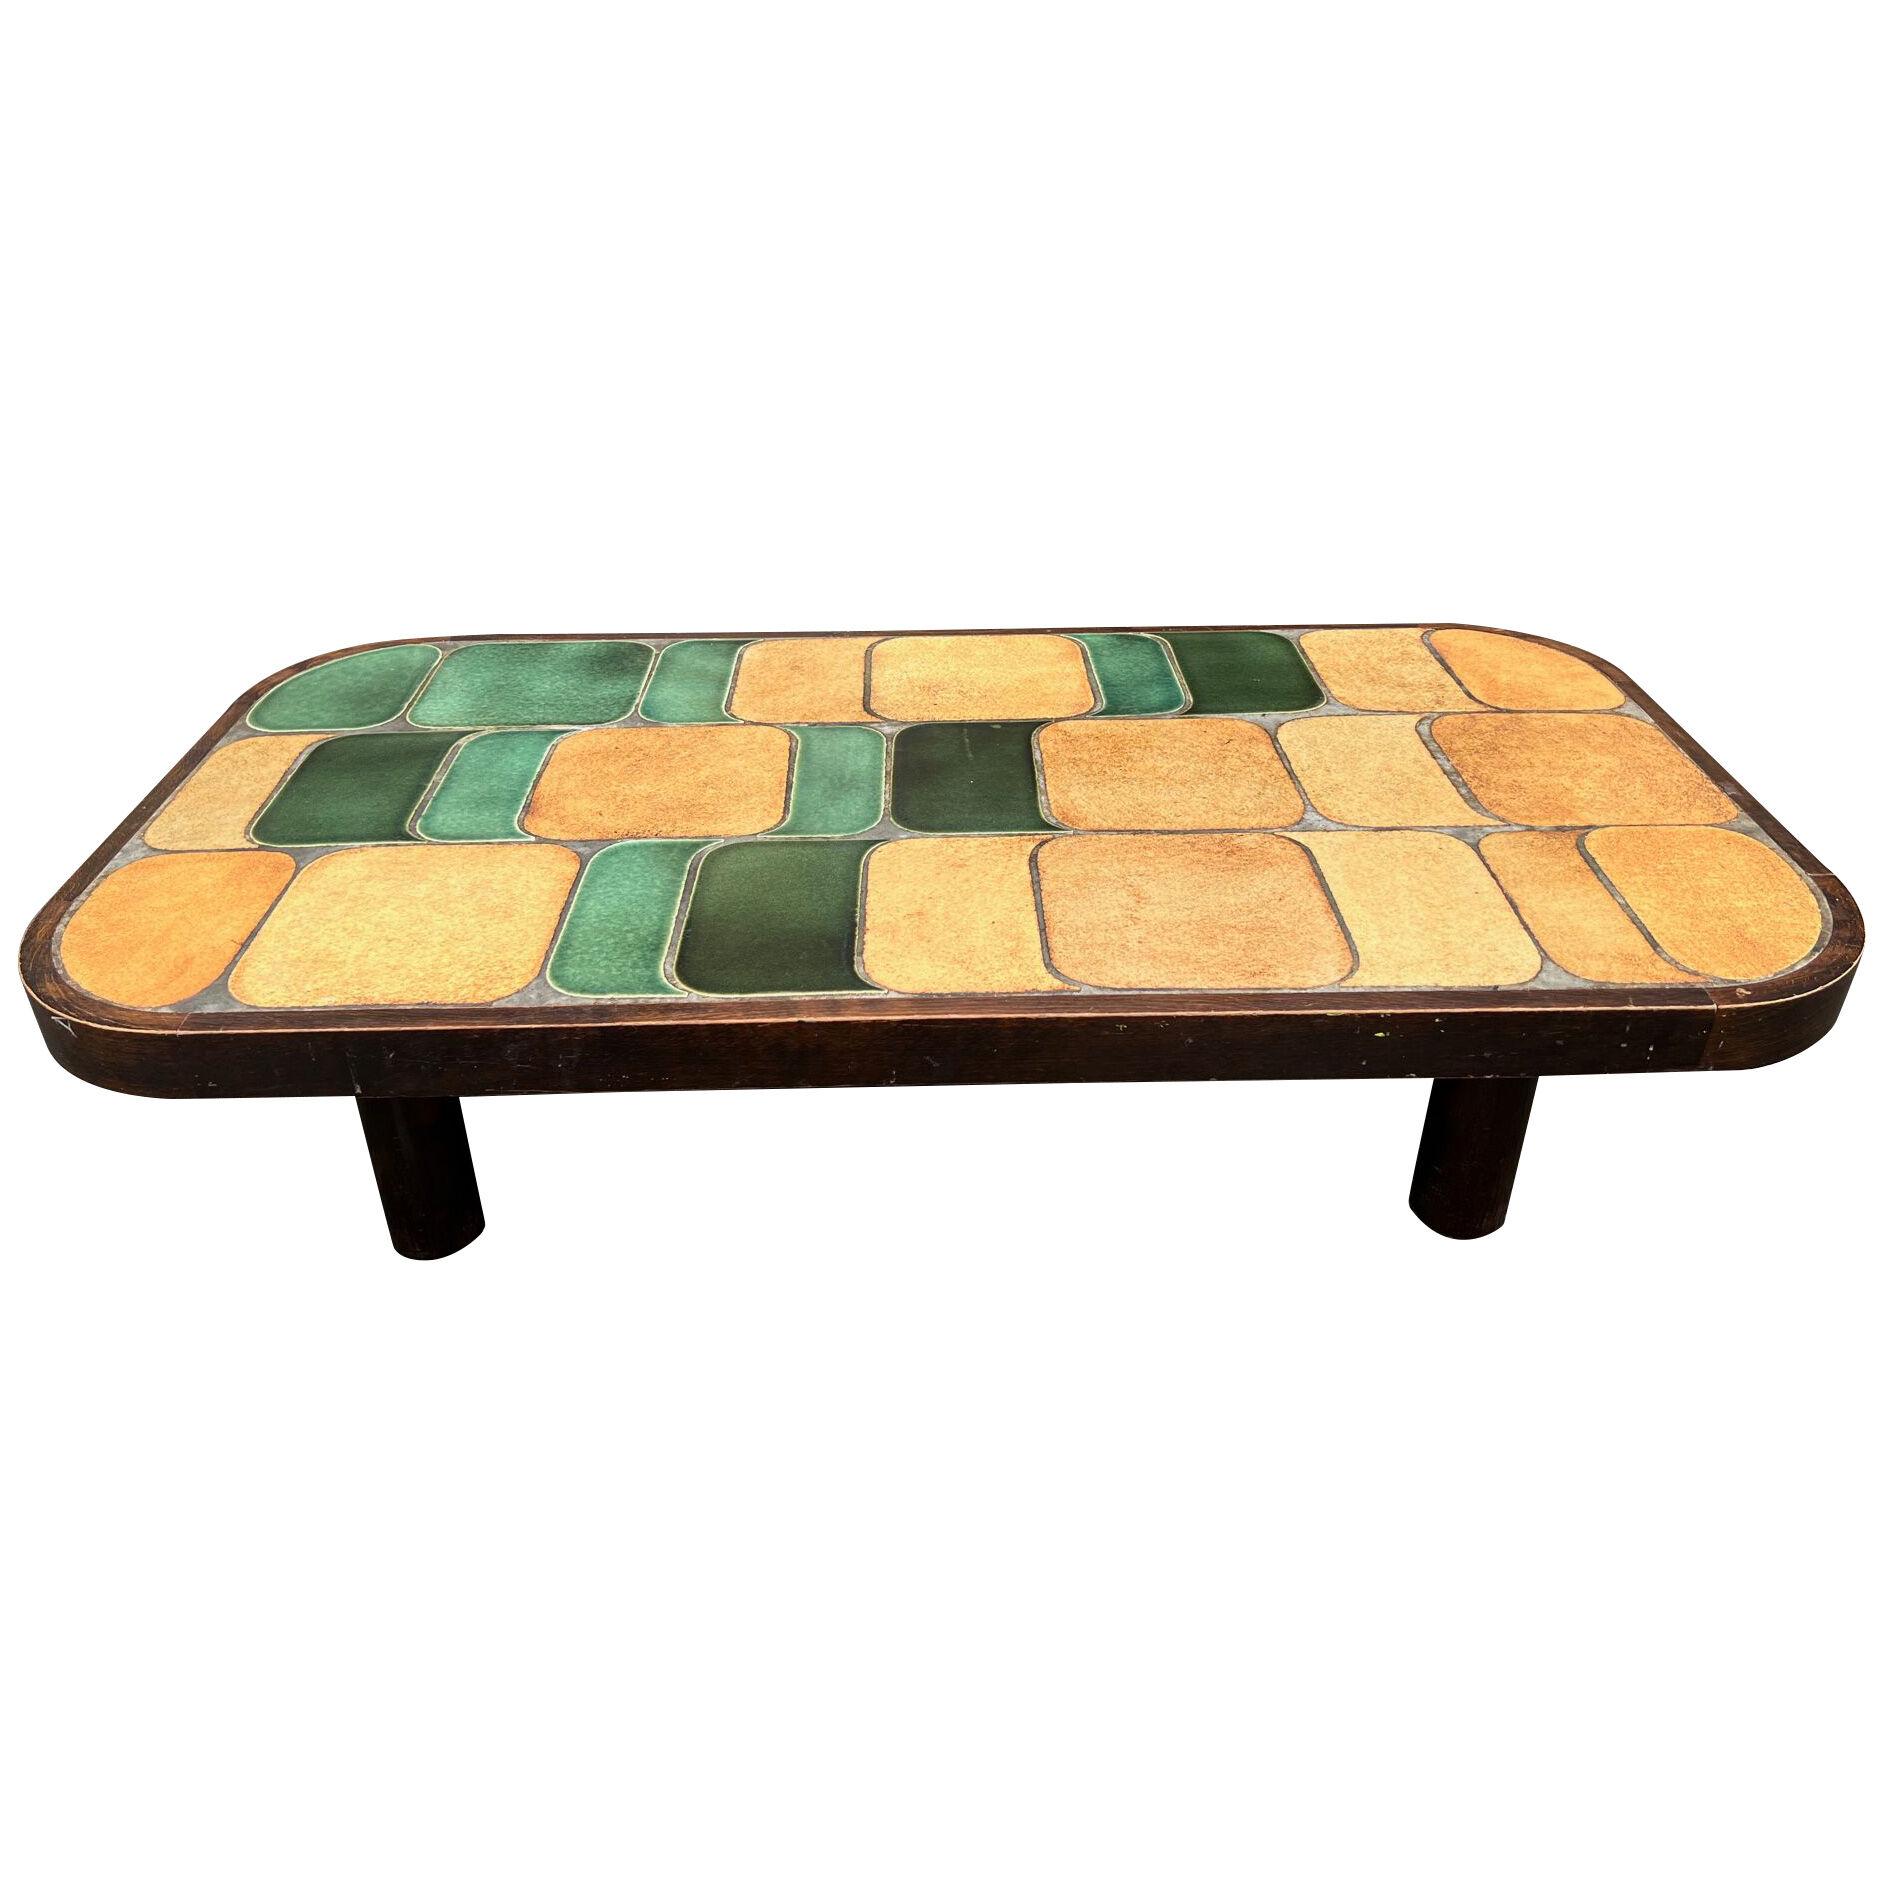 "Shogun" Ceramic Coffee Table by Roger Capron, Vallauris, France, 1970s